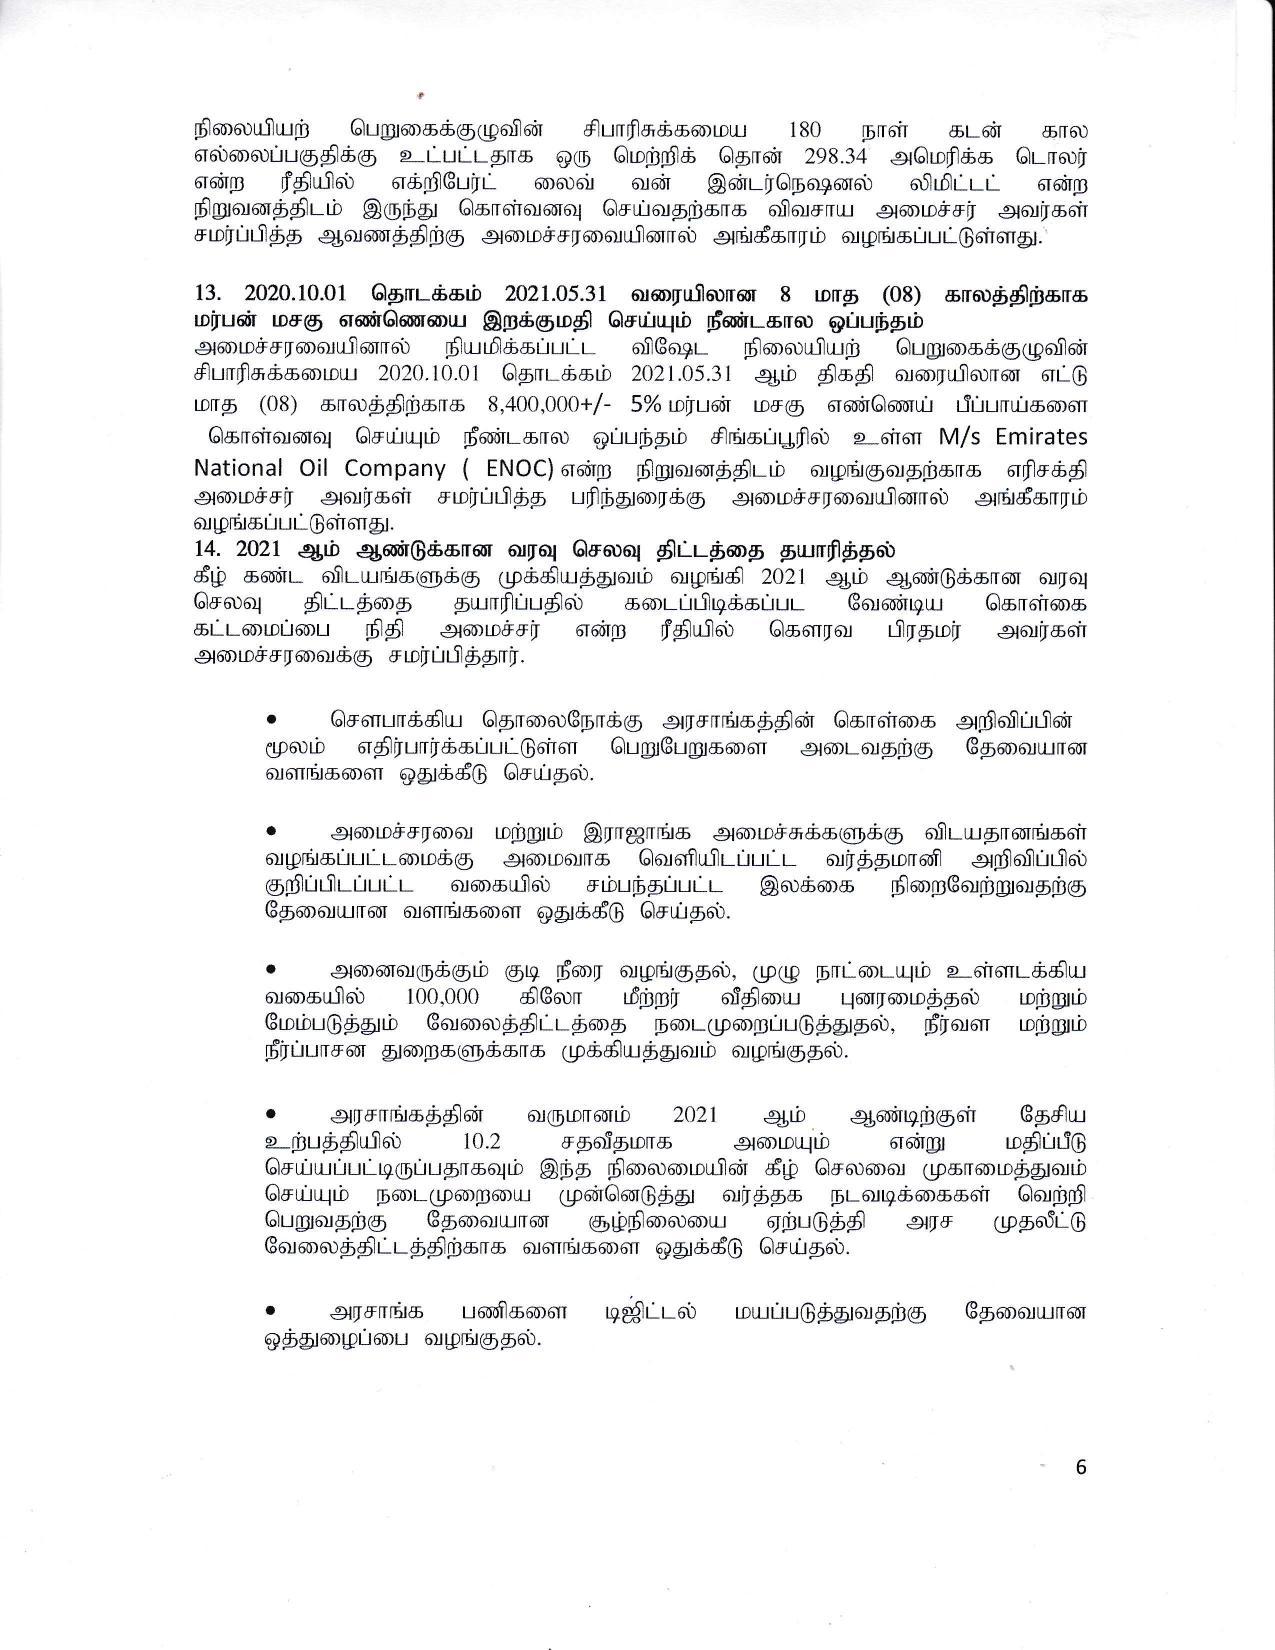 Cabinet Decision on 16.09.2020 0 Tamil 1 page 006